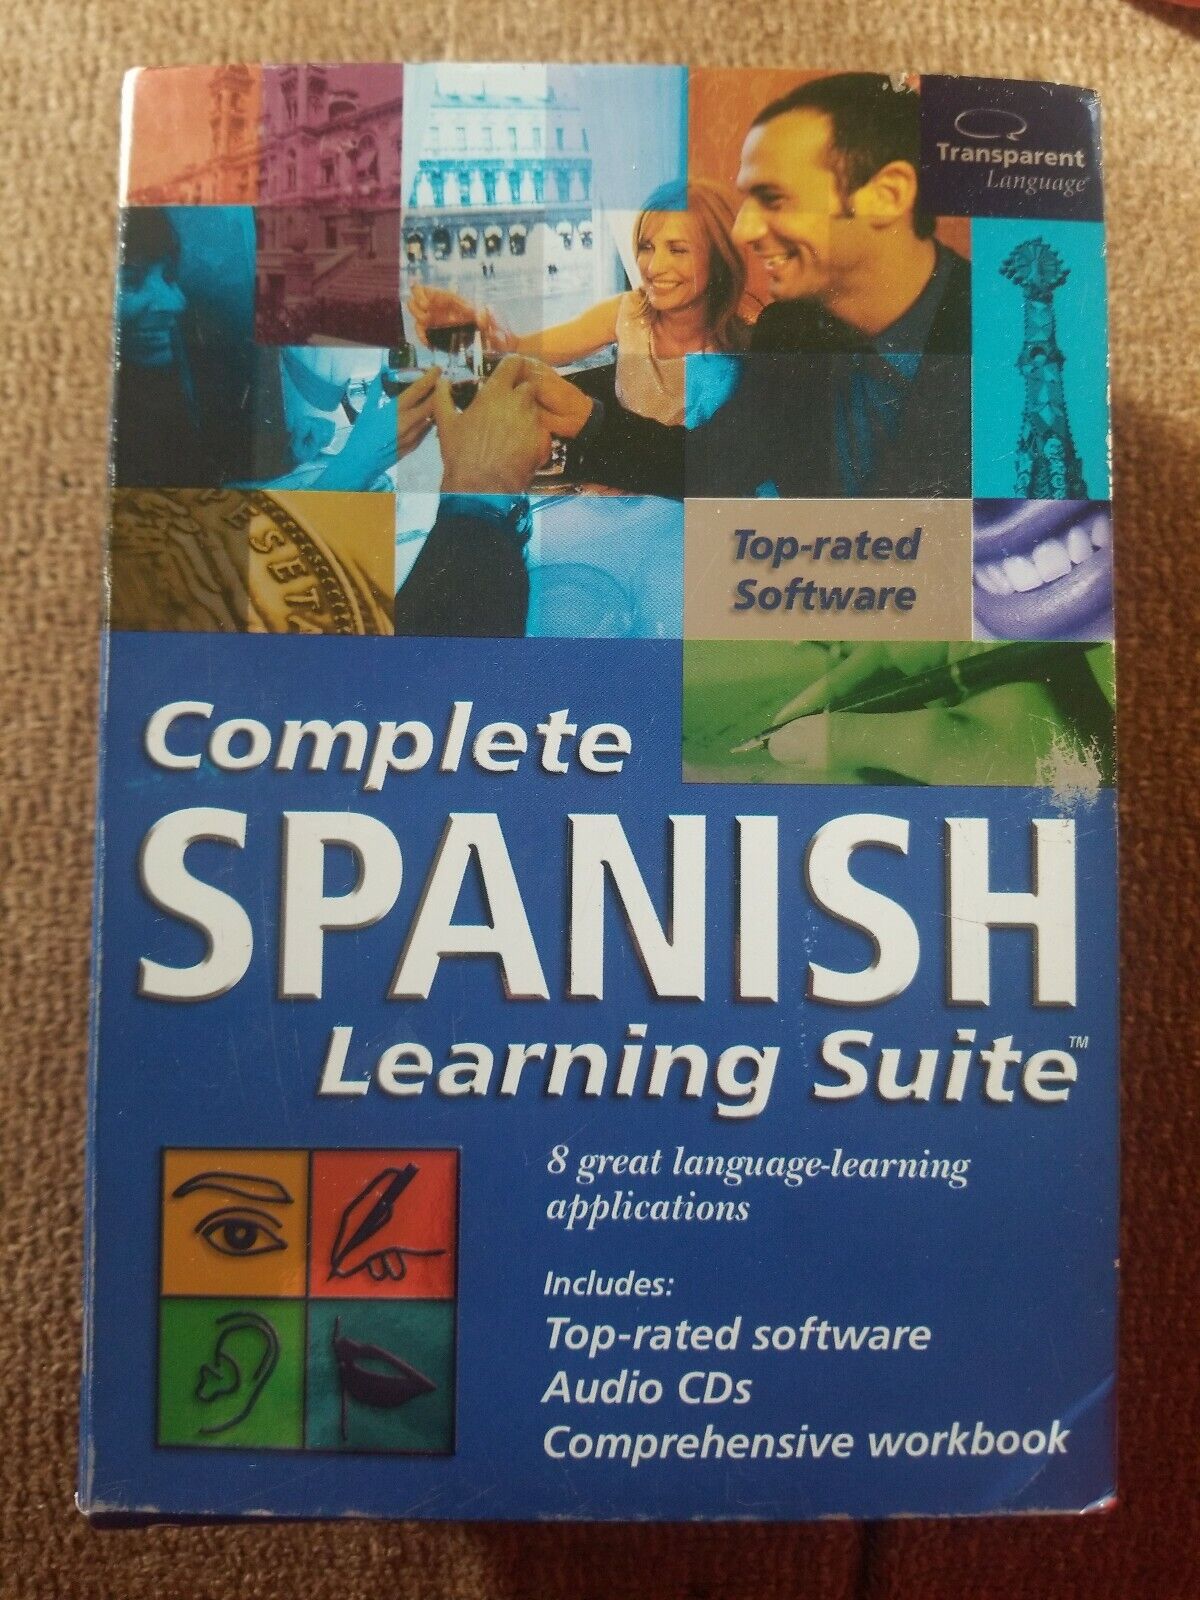 Transparent Language Complete Spanish Learning Suite Software Workbook Audio Cds